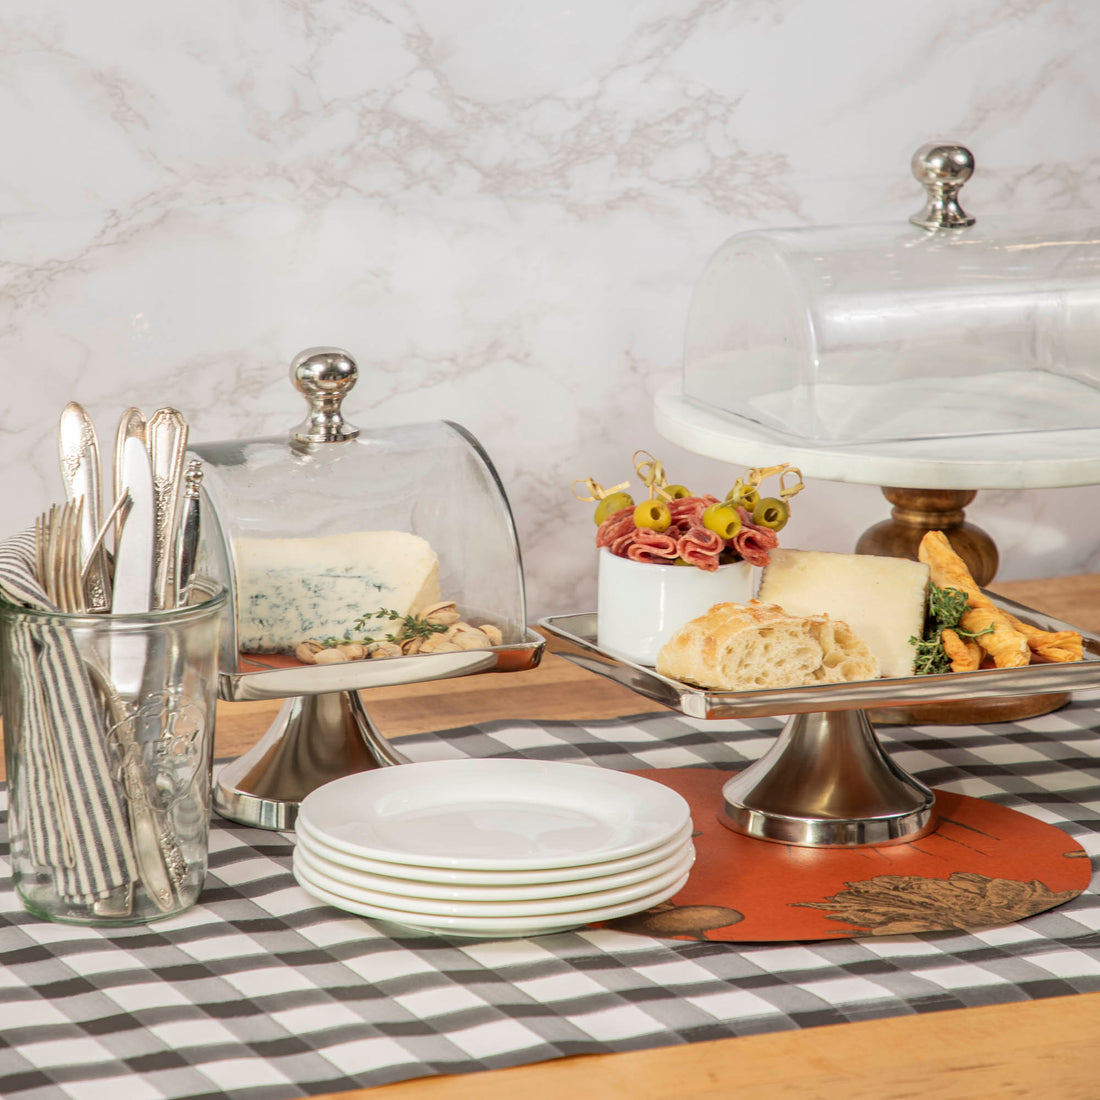 A special Aluminum and Glass Serving Stand &amp; Dome by Hester &amp; Cook is on the glass top table.